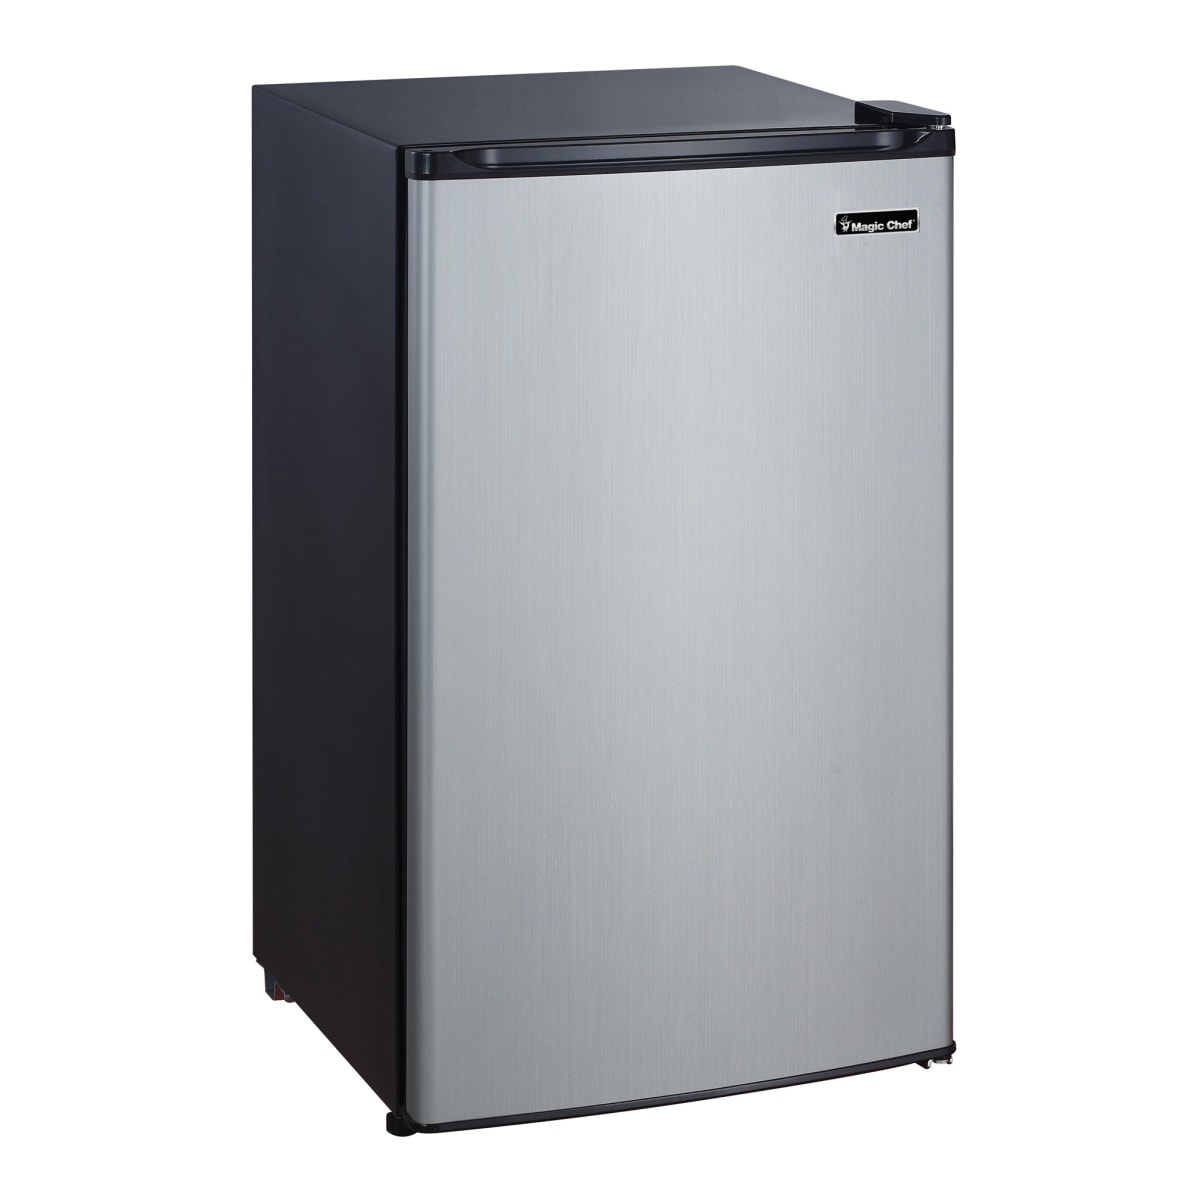 MagicChef MCBR350S2 Refrigerator with Freezer, 3.5 Cu. Ft with 1-Year Warranty